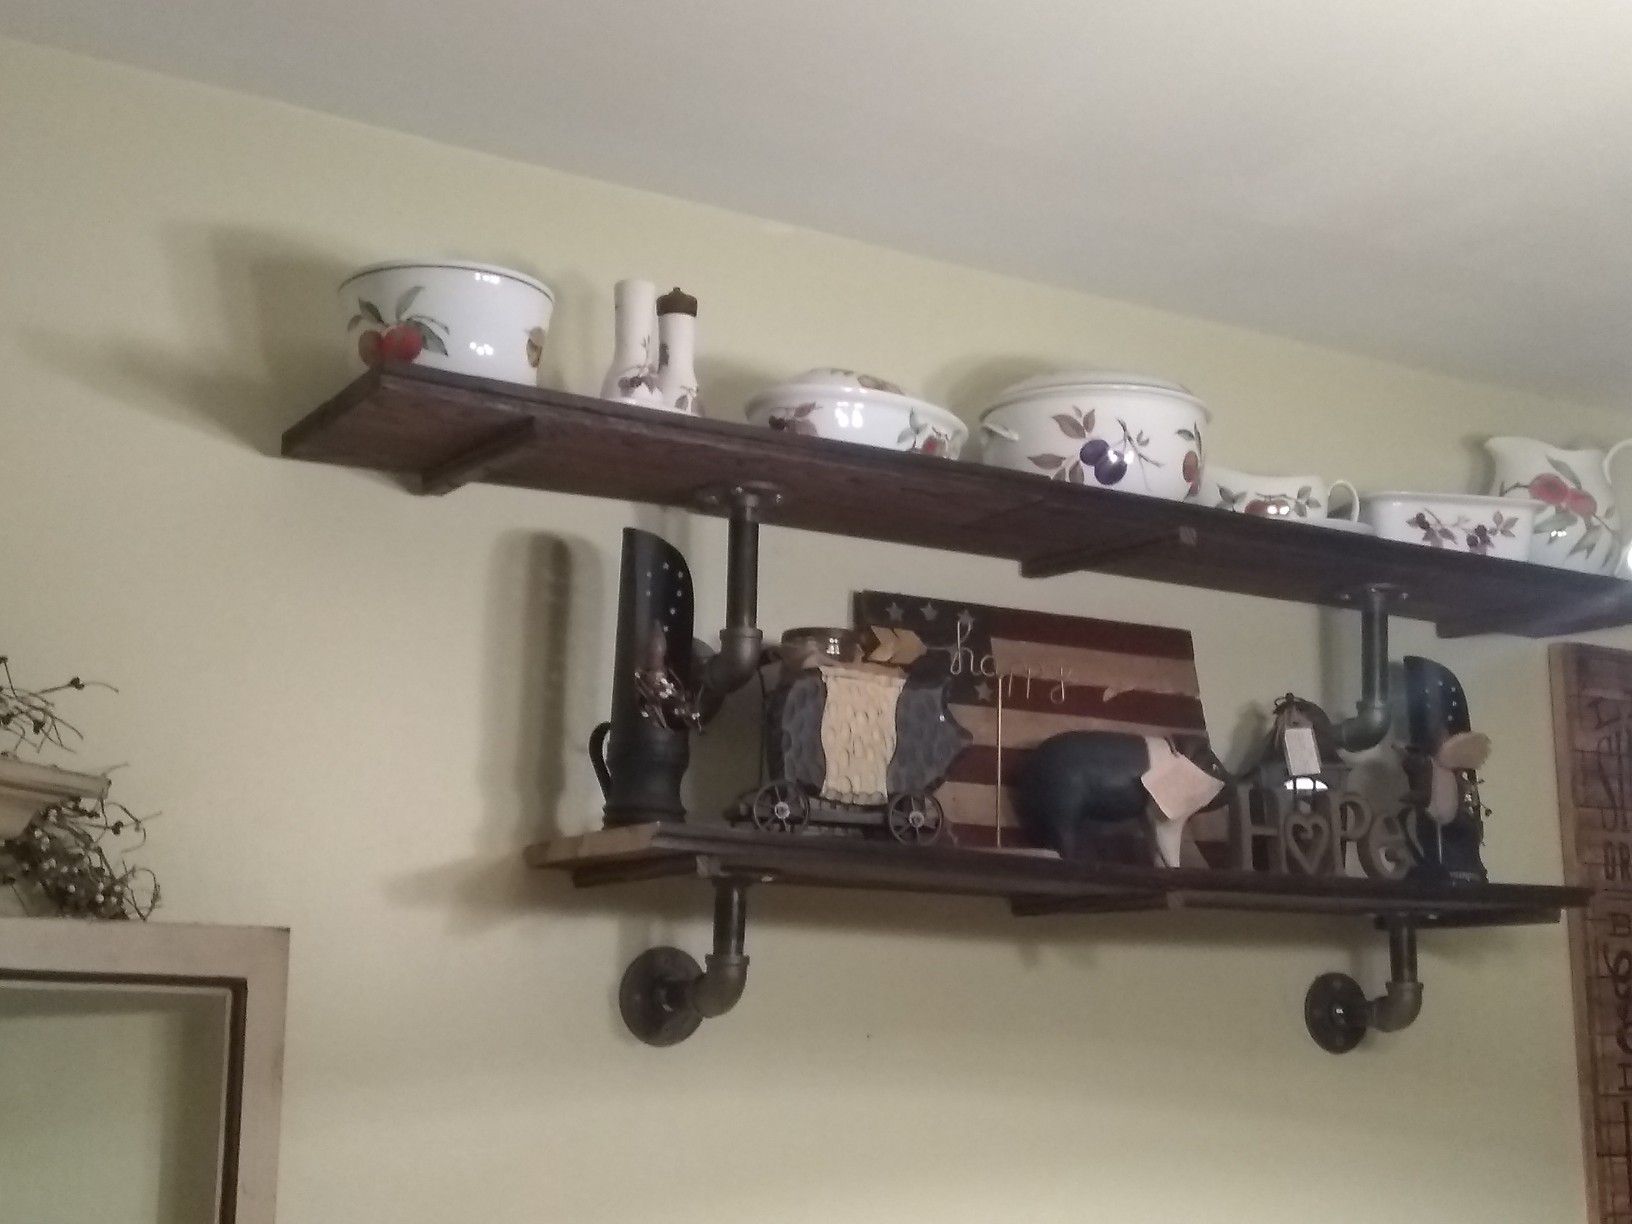 Picture hangers and shelving